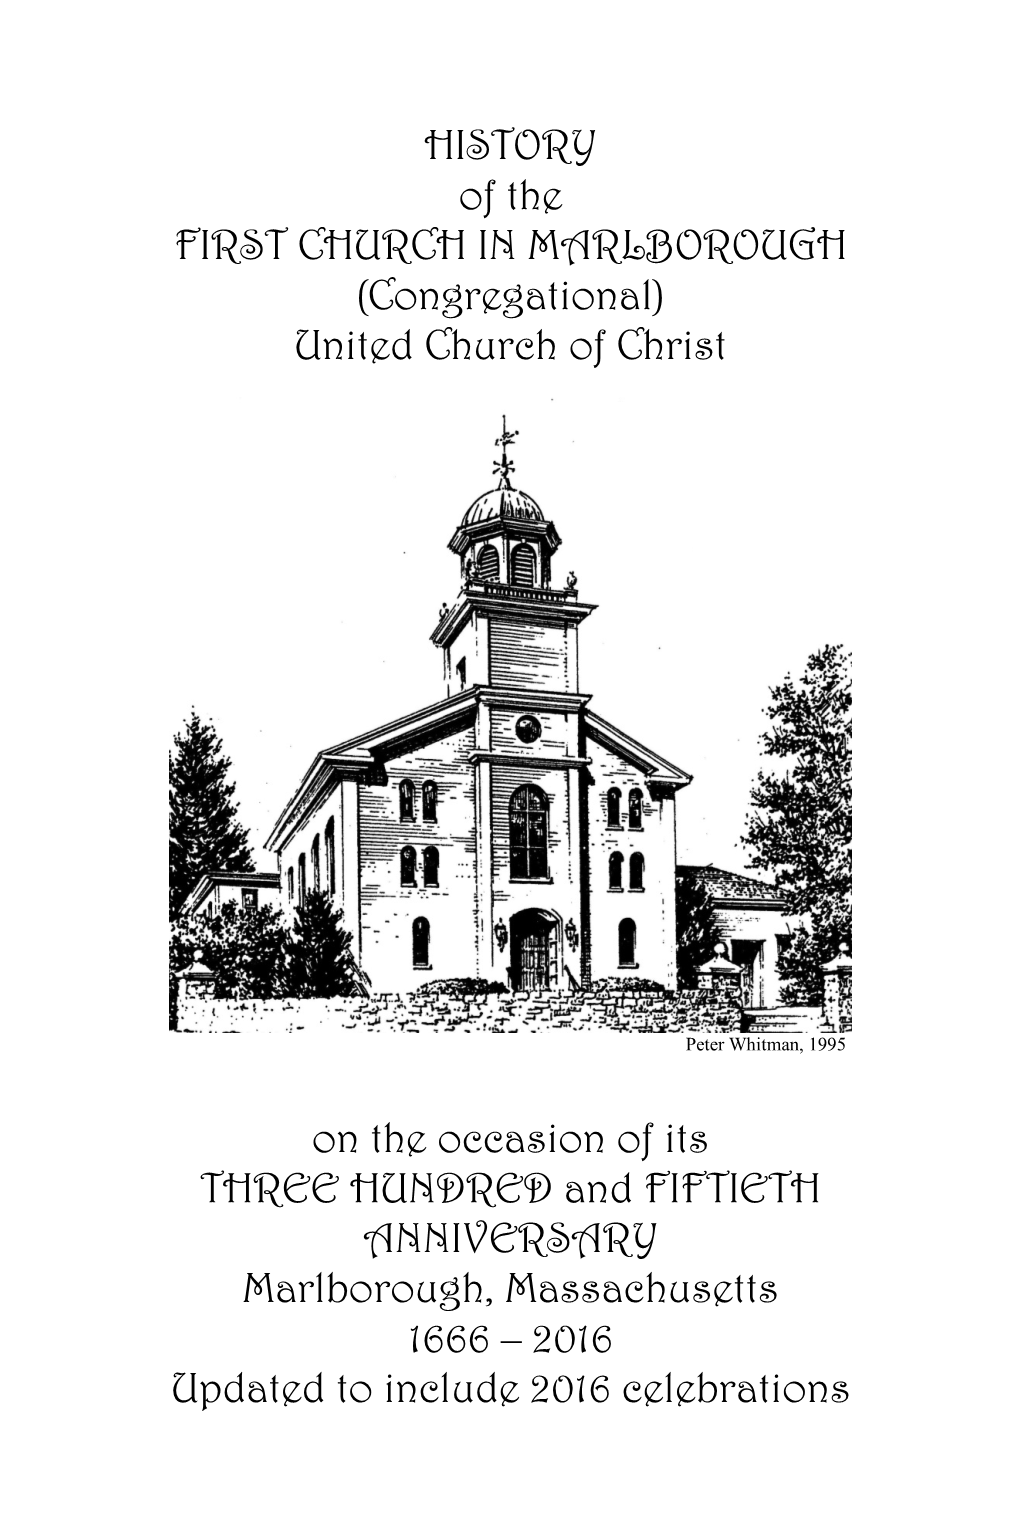 HISTORY of the FIRST CHURCH in MARLBOROUGH (Congregational) United Church of Christ